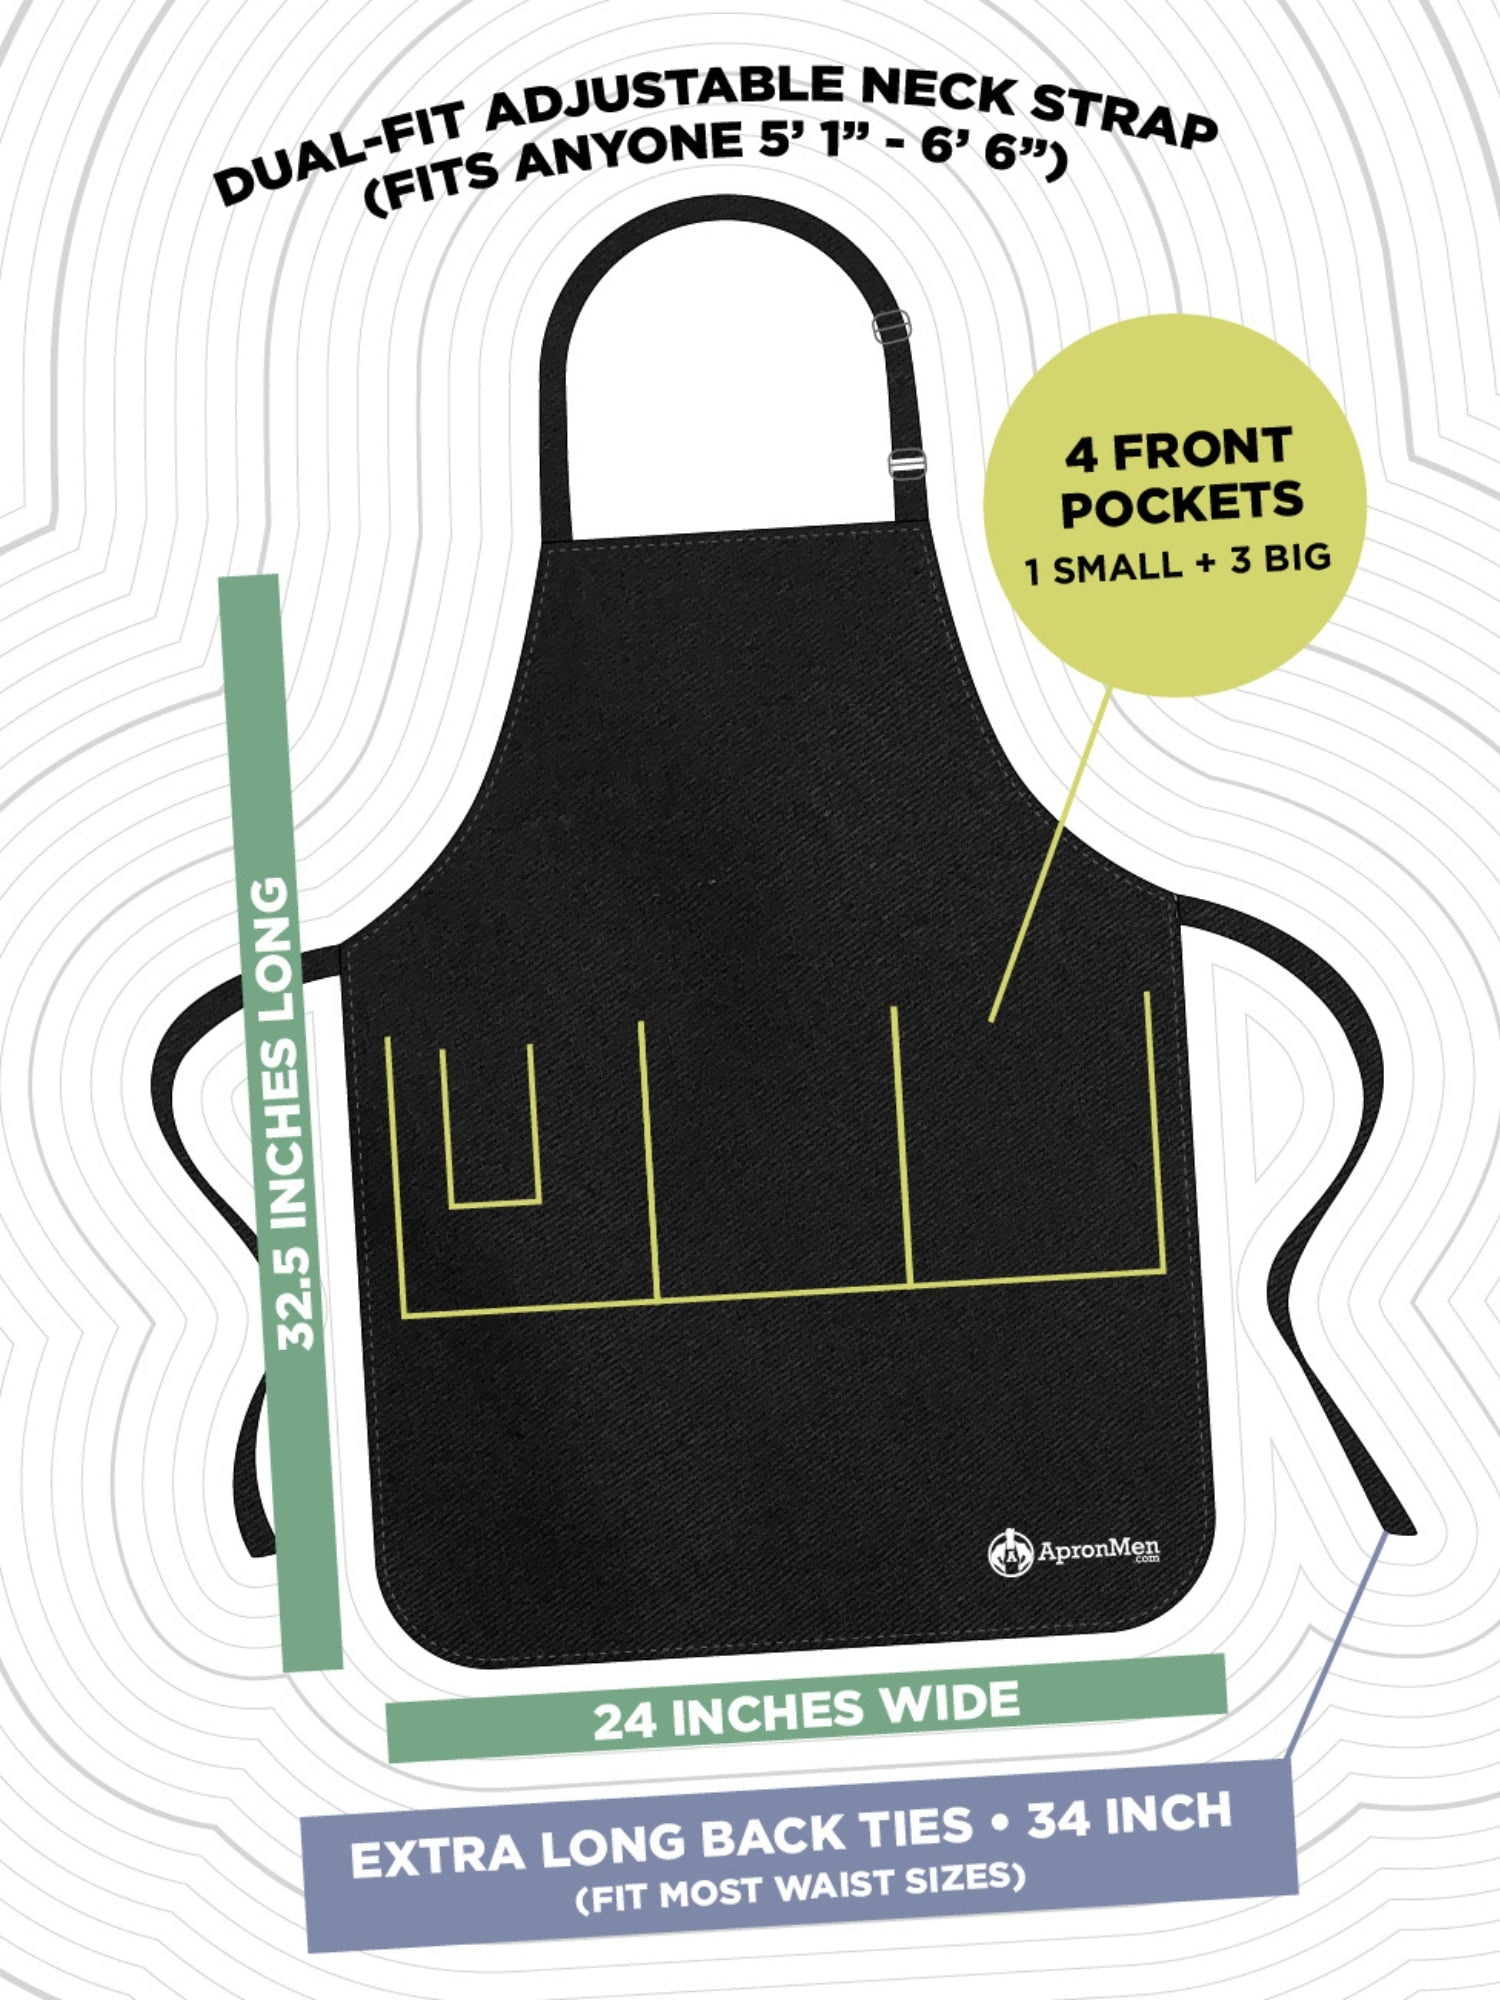 Apron for Men - Mr. Good Looking is Cooking - Personalized Men Birthday  Gifts Apron with Pockets